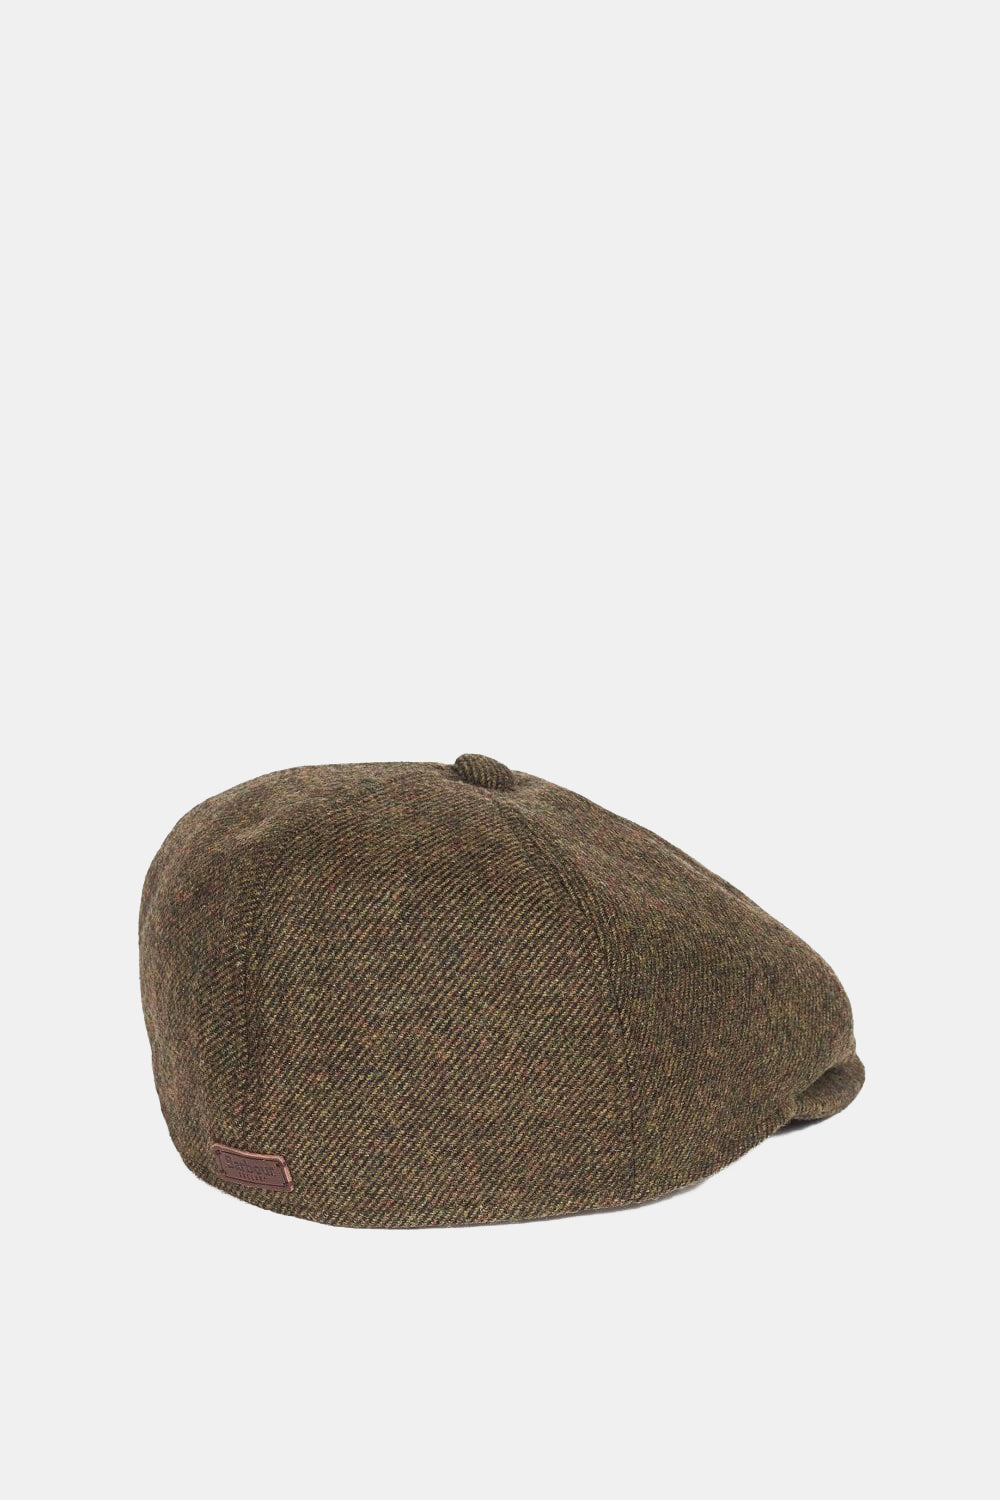 Barbour Claymore Bakerboy Flat Cap (Olive Twill)